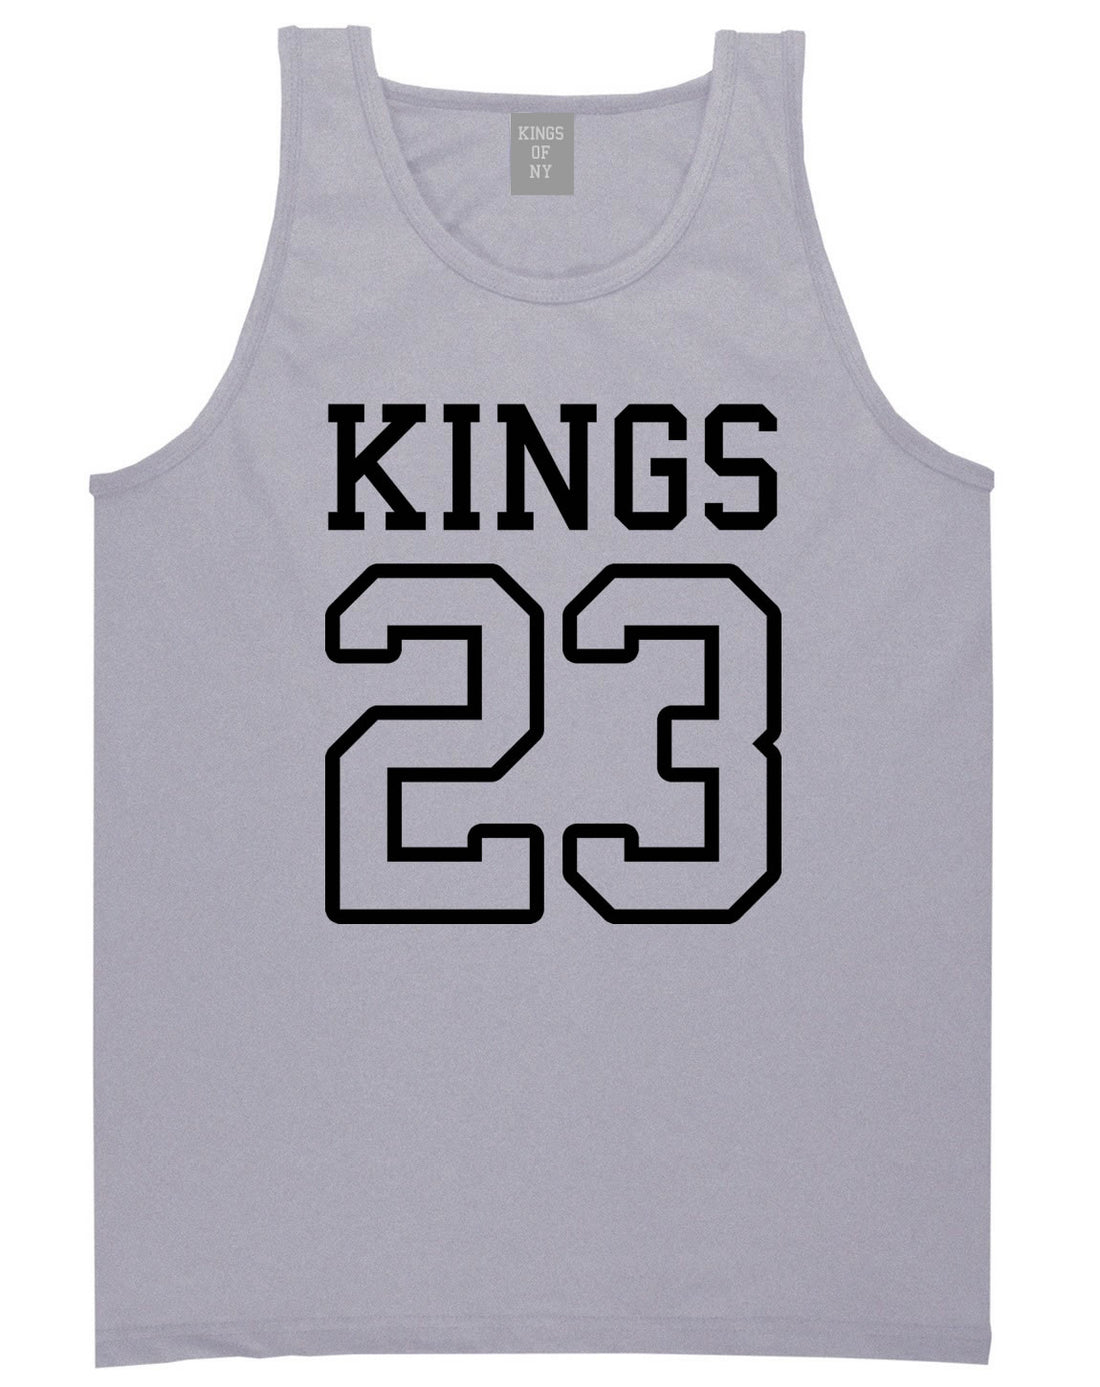 KINGS 23 Jersey Tank Top in Grey By Kings Of NY